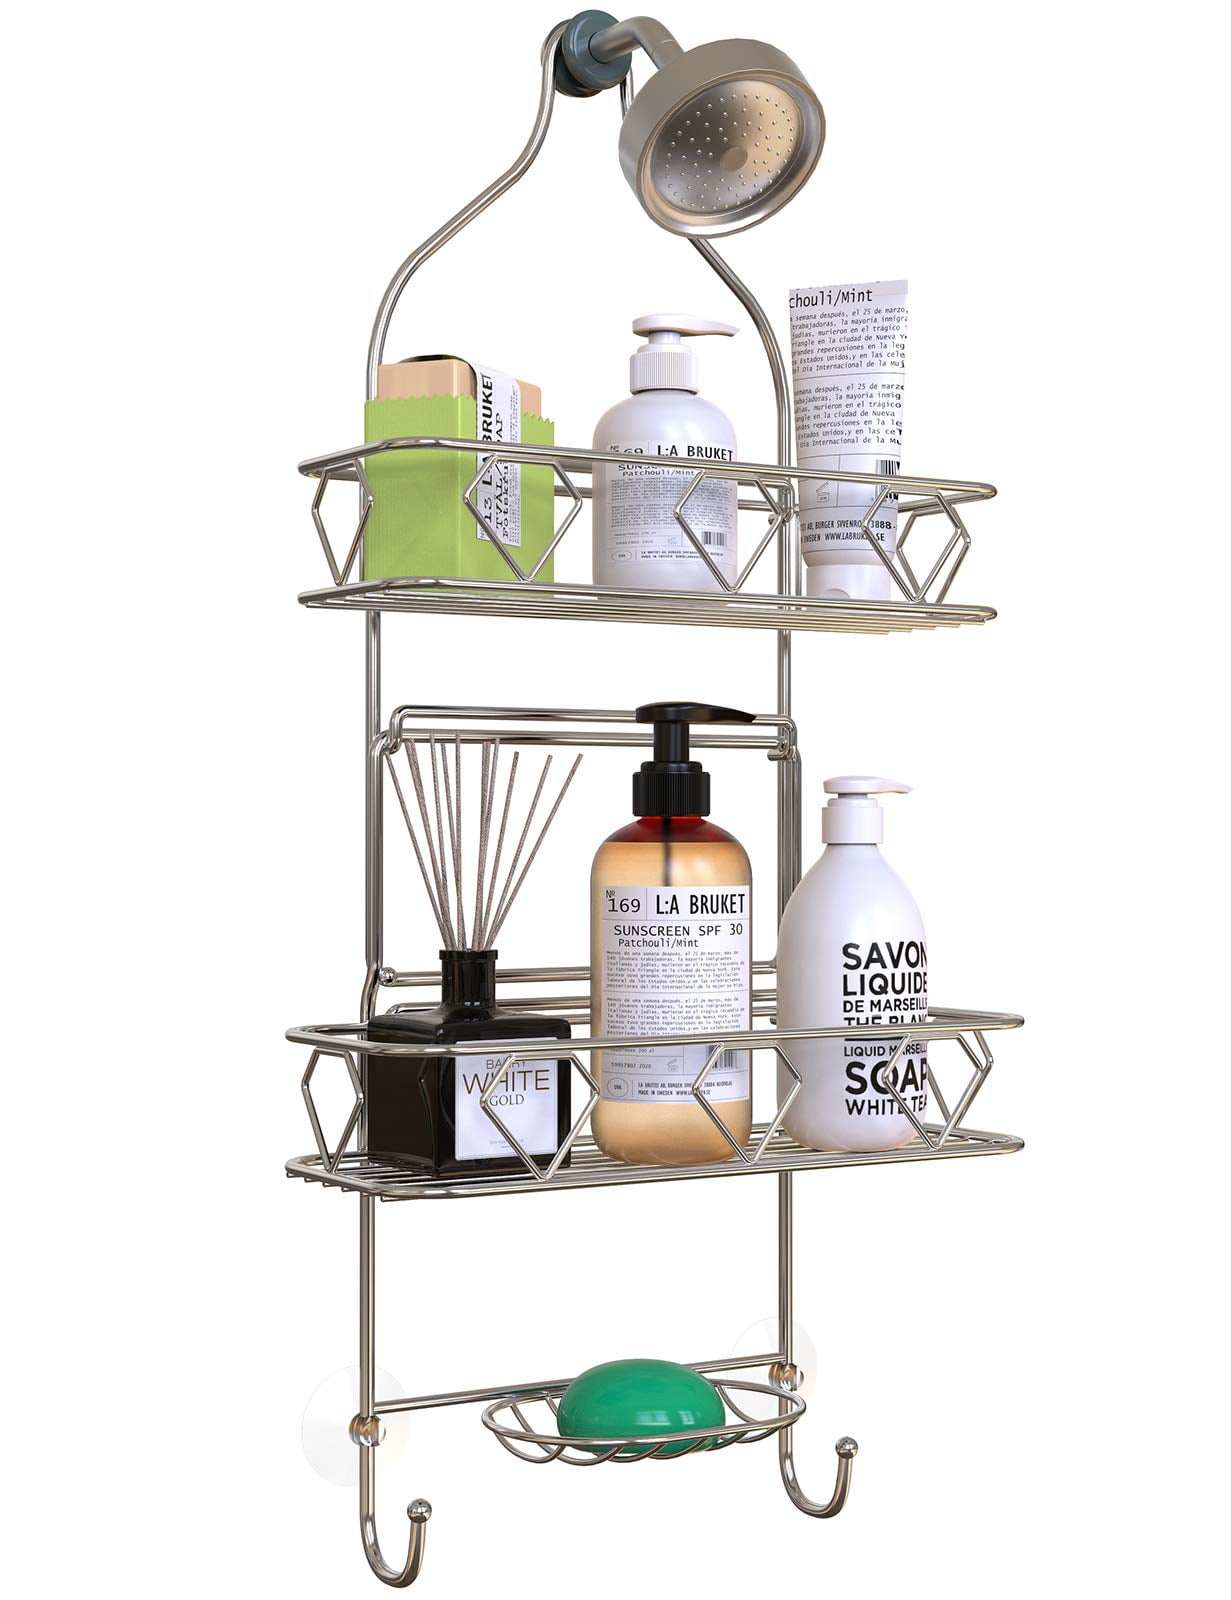 Vdomus 2 Tier Corner Shower Caddy Stainless Steel Wall Mounted Shower Caddy Corner, Shower Shelf for Inside Shower, Drill-Free Install with